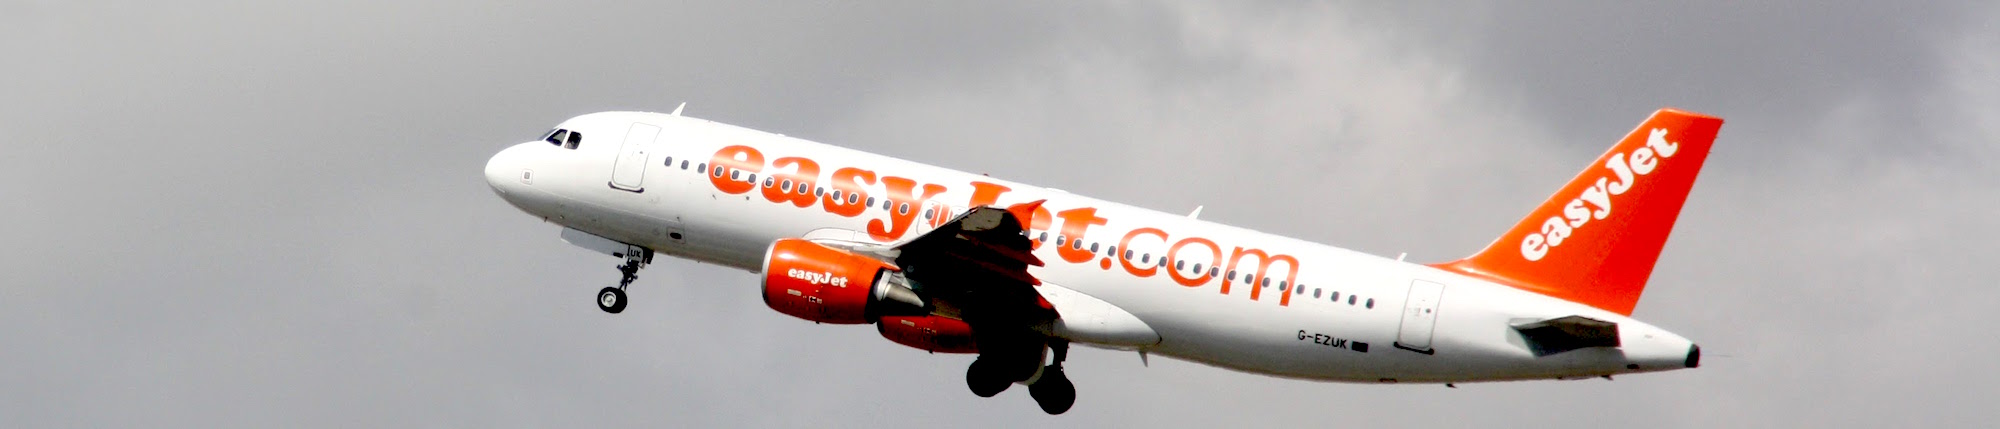 Best time to book flights for Paris (CDG) to Milano (MXP) flights with EasyJet at AirHint